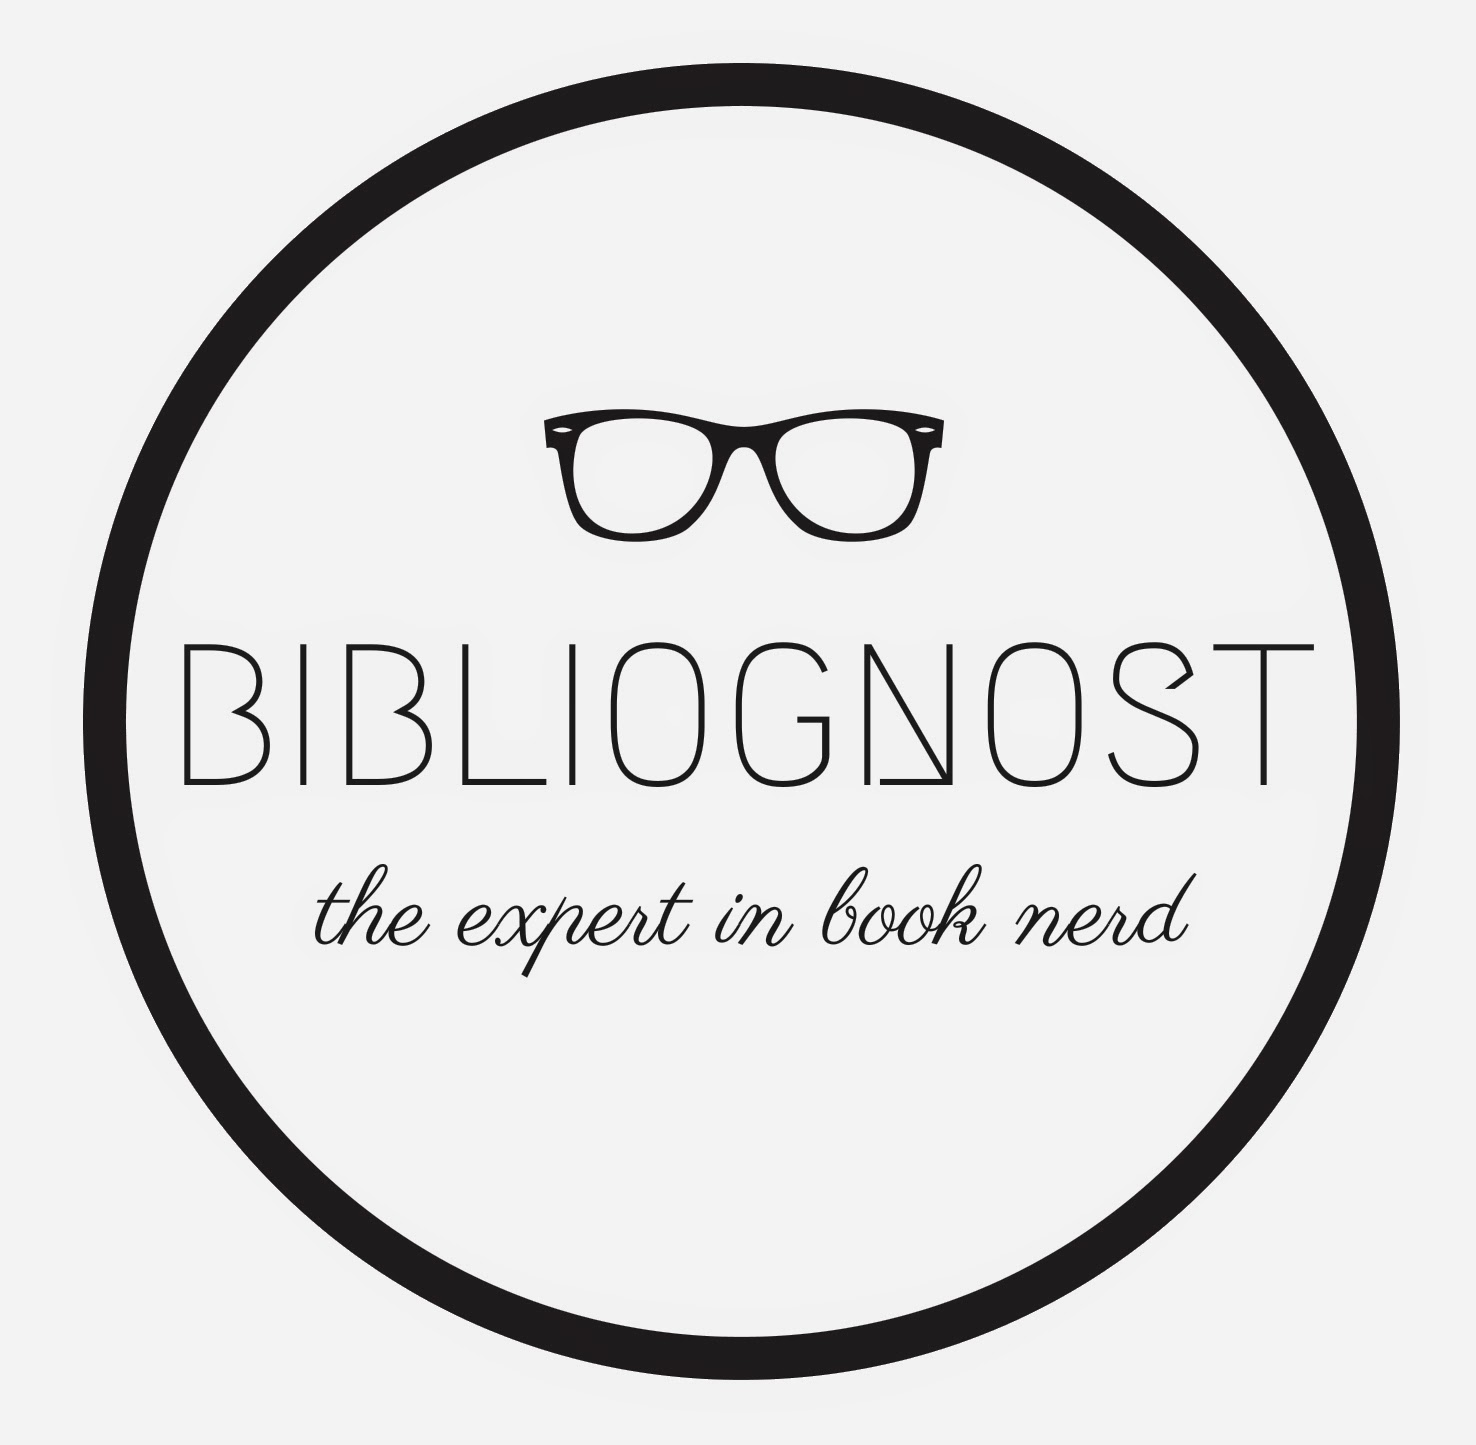 "Bibliognost n well read individual a person with a wide knowledge of books"